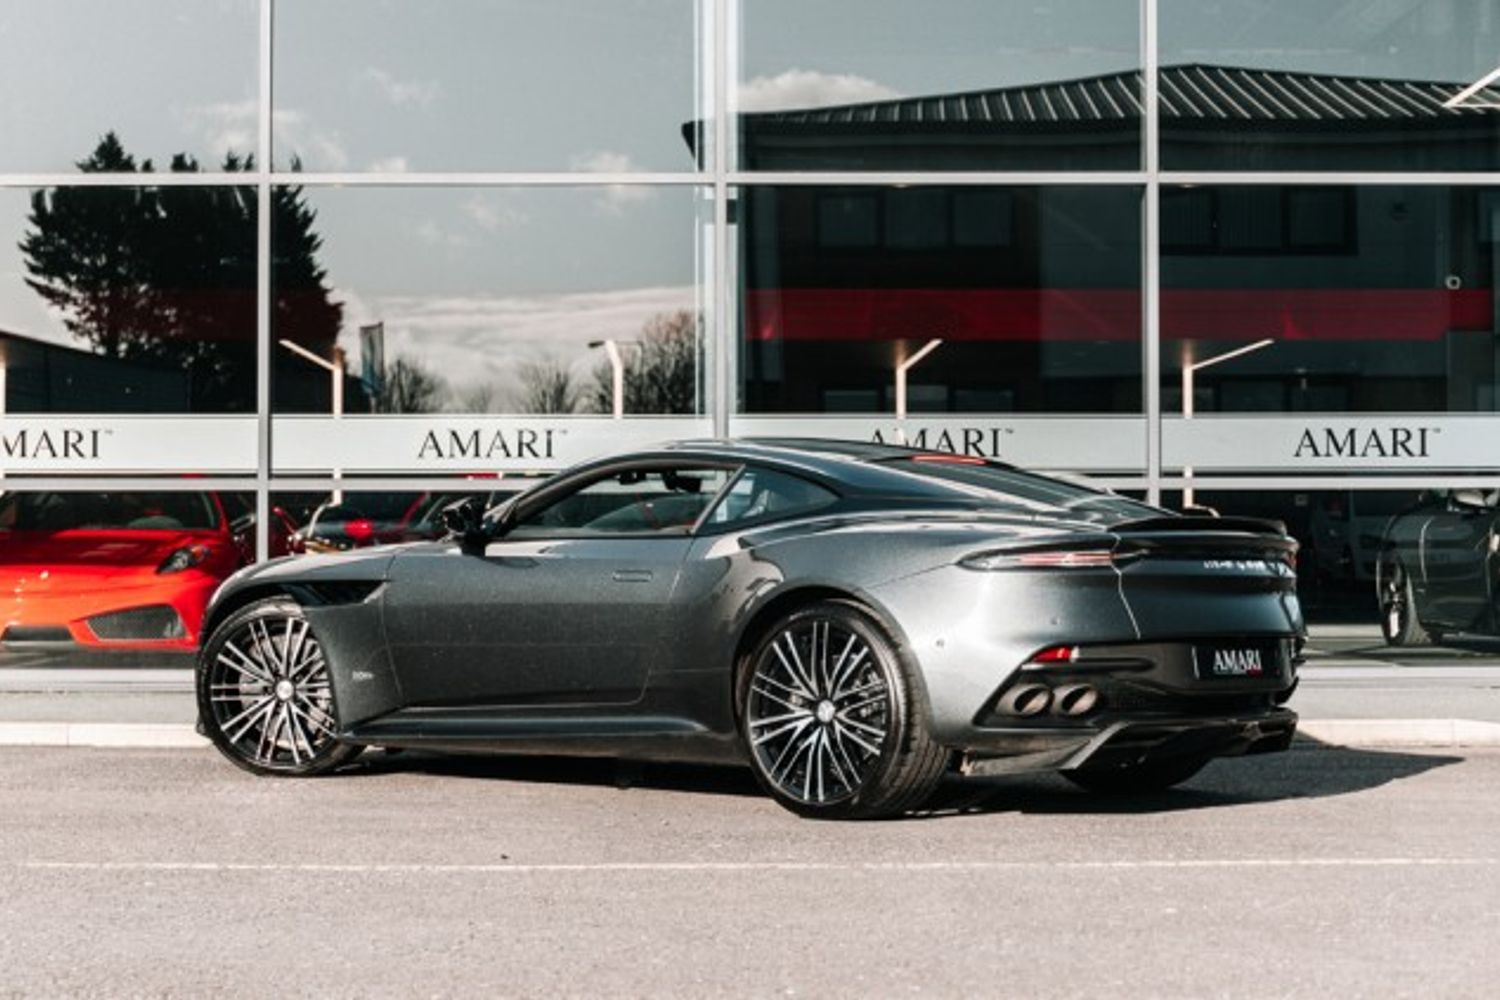 ASTON MARTIN DBS COUPE 5.2 V12 2DR AUTOMATIC